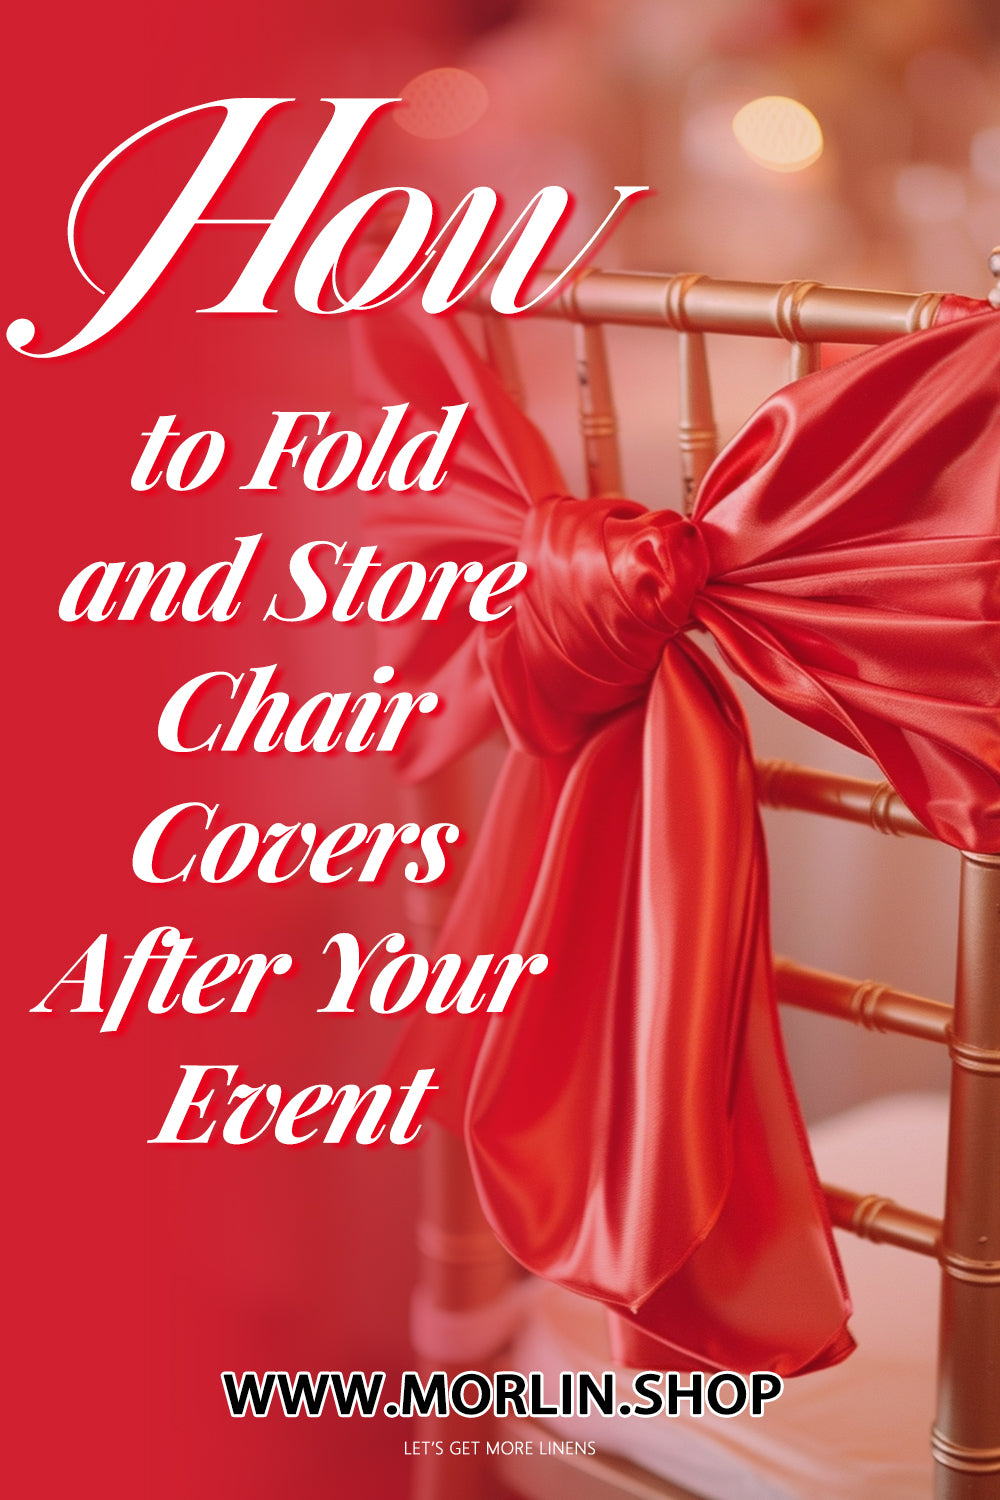 How to Fold and Store Chair Covers After Your Event